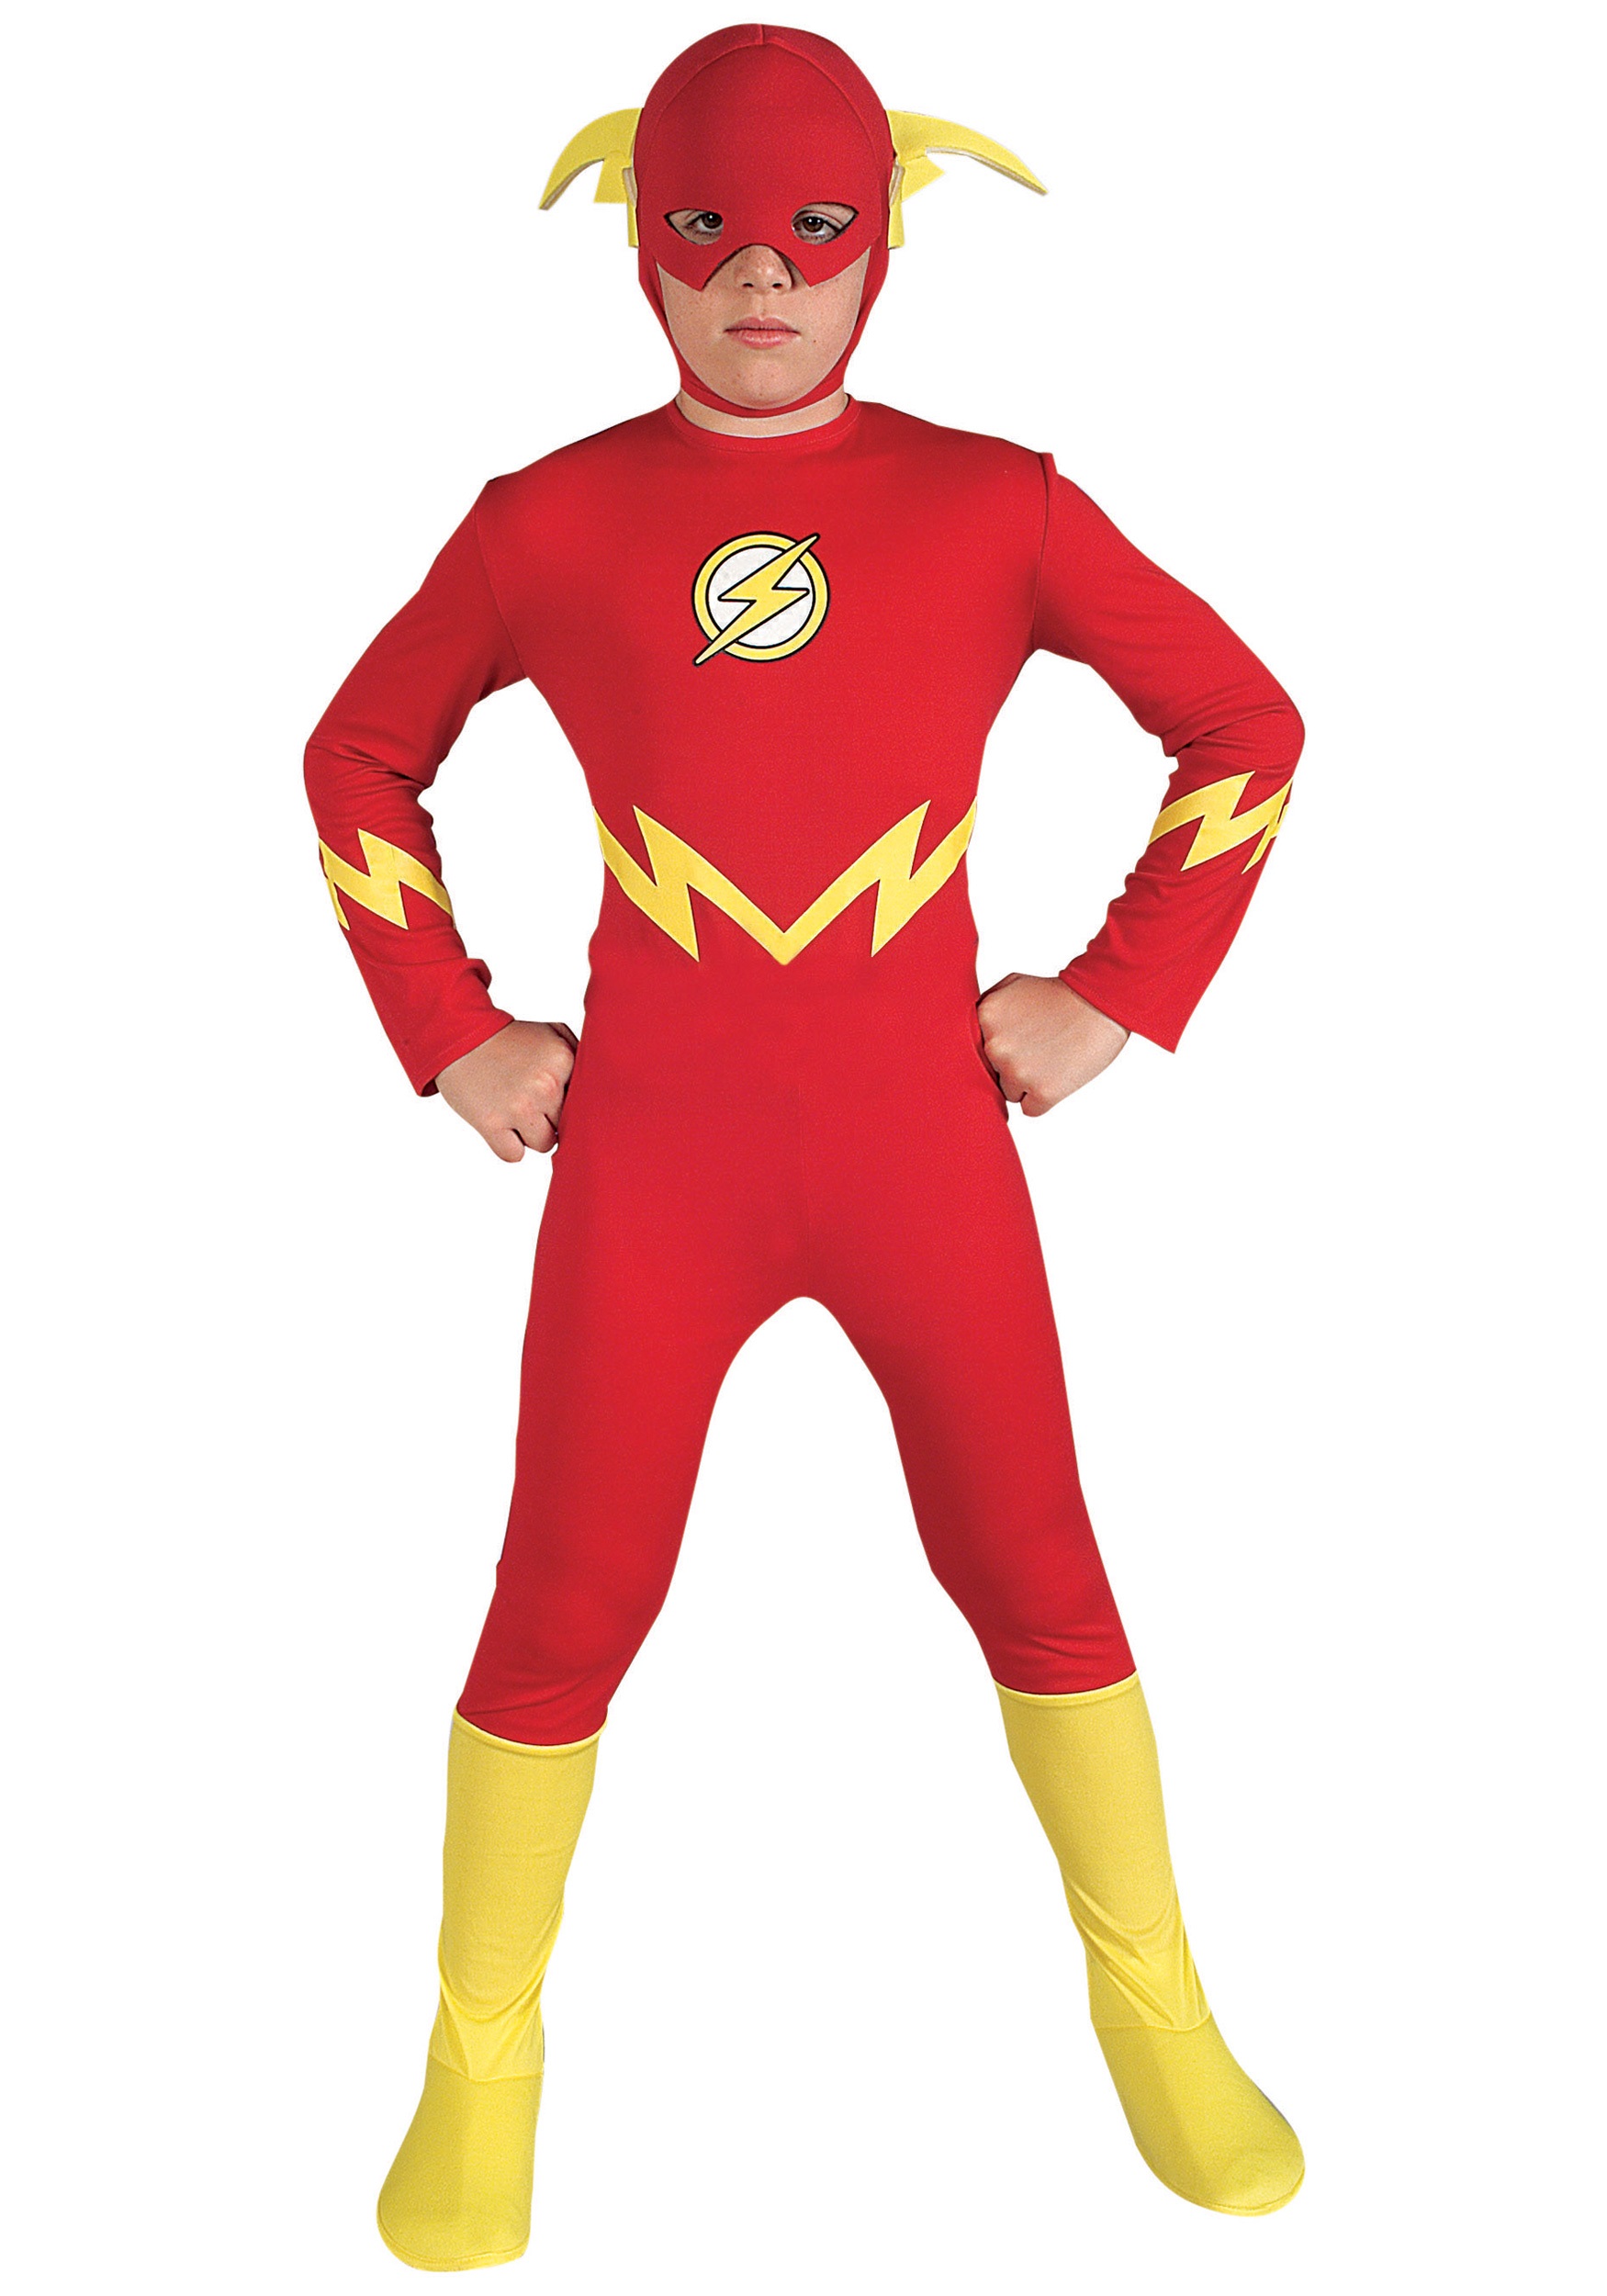 Photos - Fancy Dress Rubies Costume Co. Inc The Flash Costume for Boys Red RU882112 